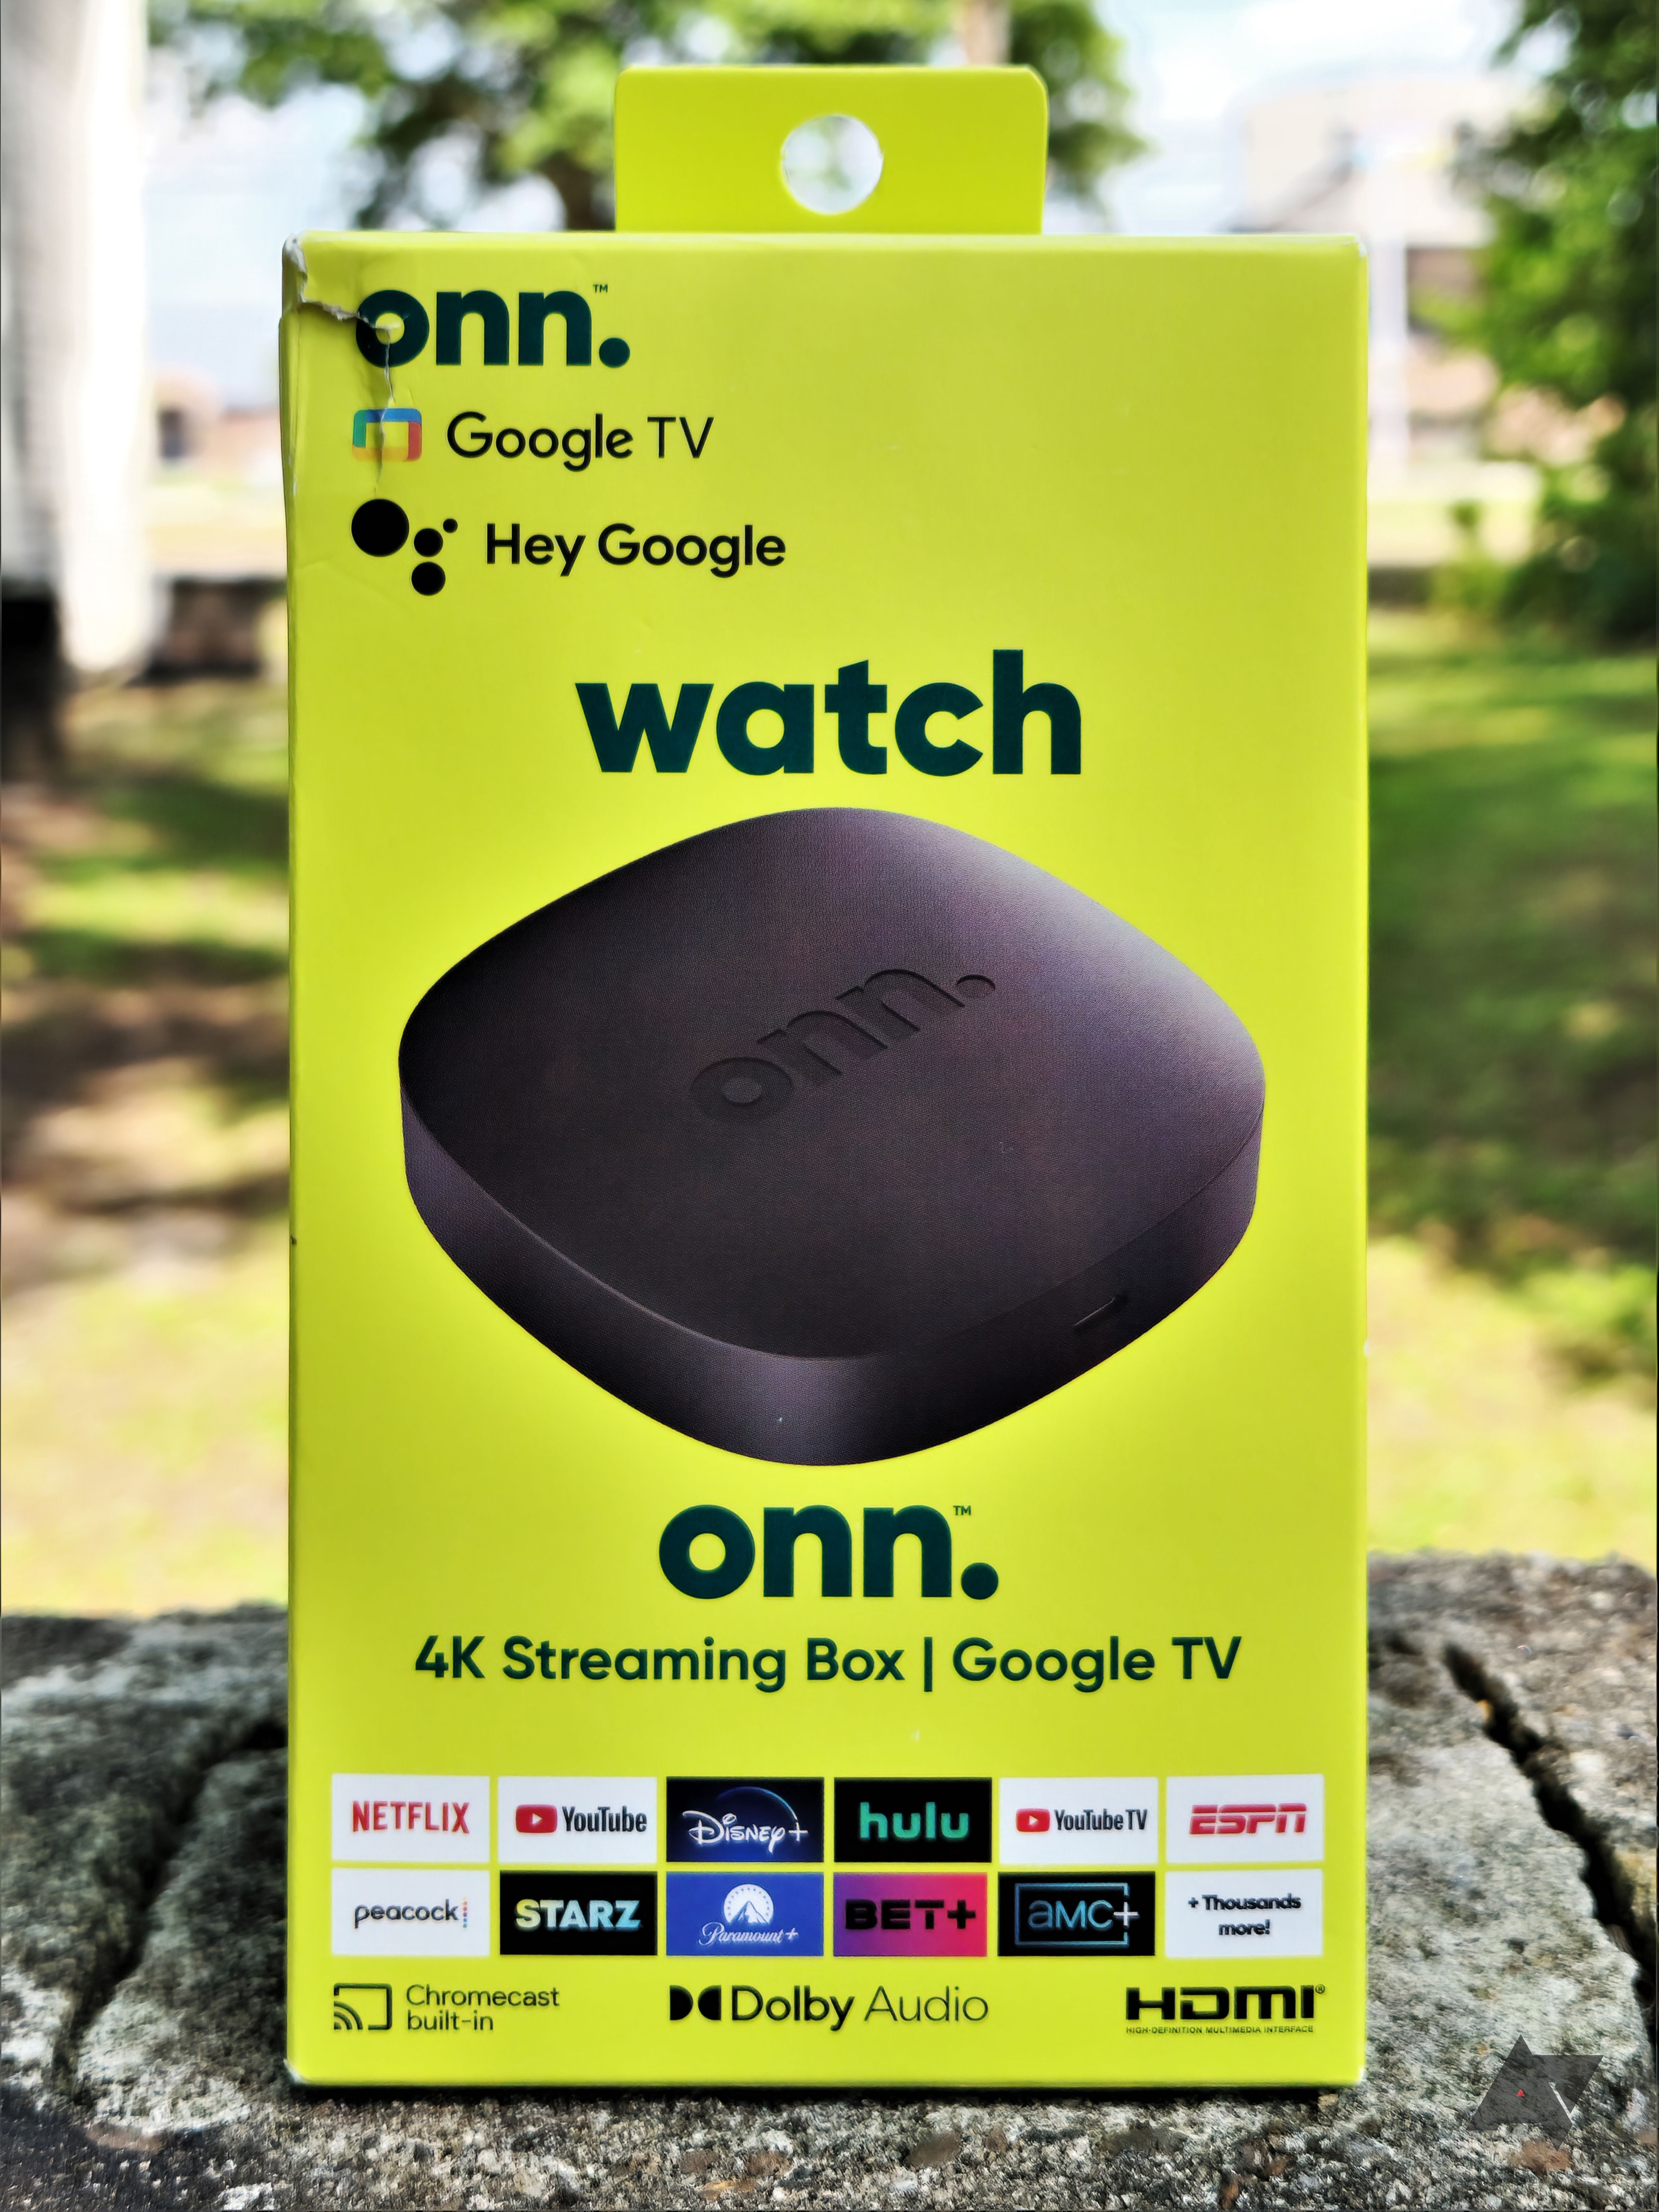 Google gives tips for how to buy Android TV box without malware